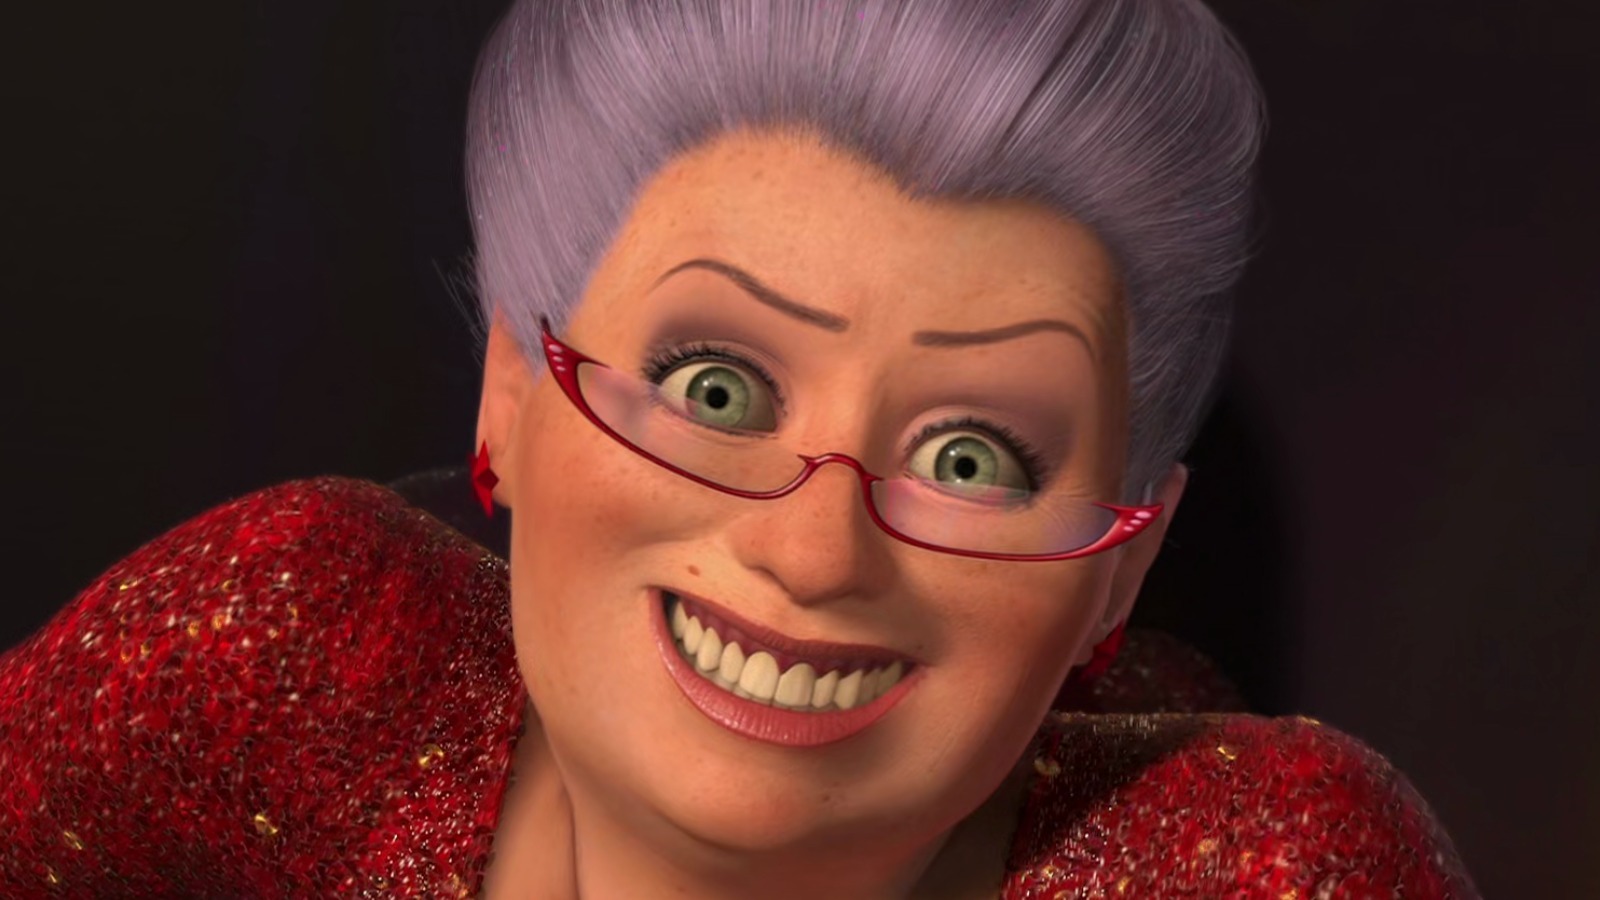 Who Plays The Fairy Godmother In Shrek